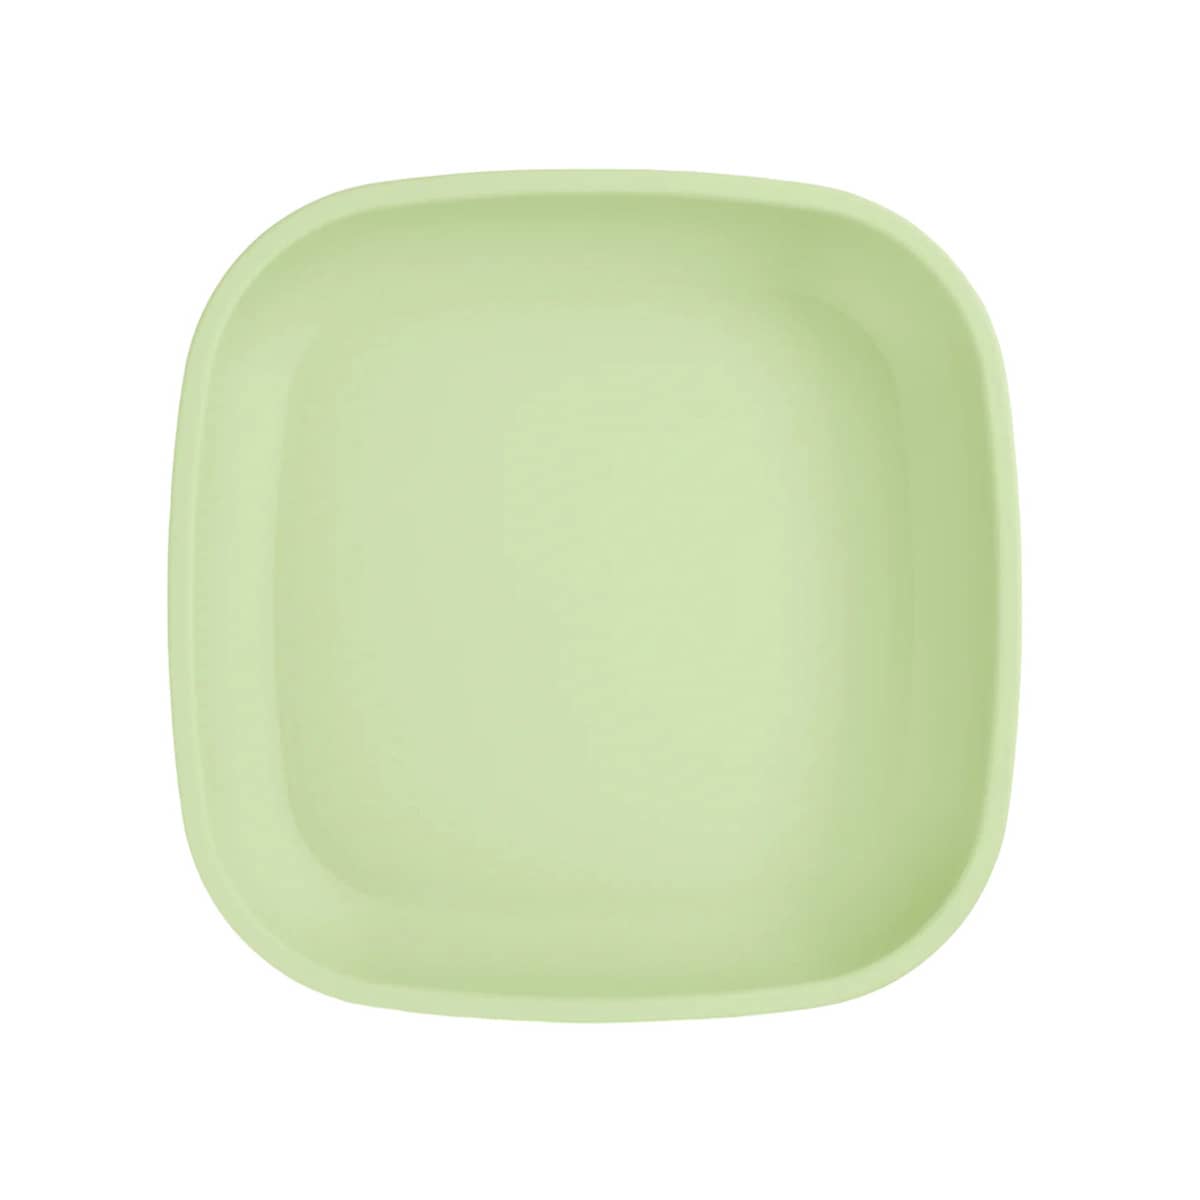 Re-Play Recycled Flat Plate - Naturals Collection - Leaf Green